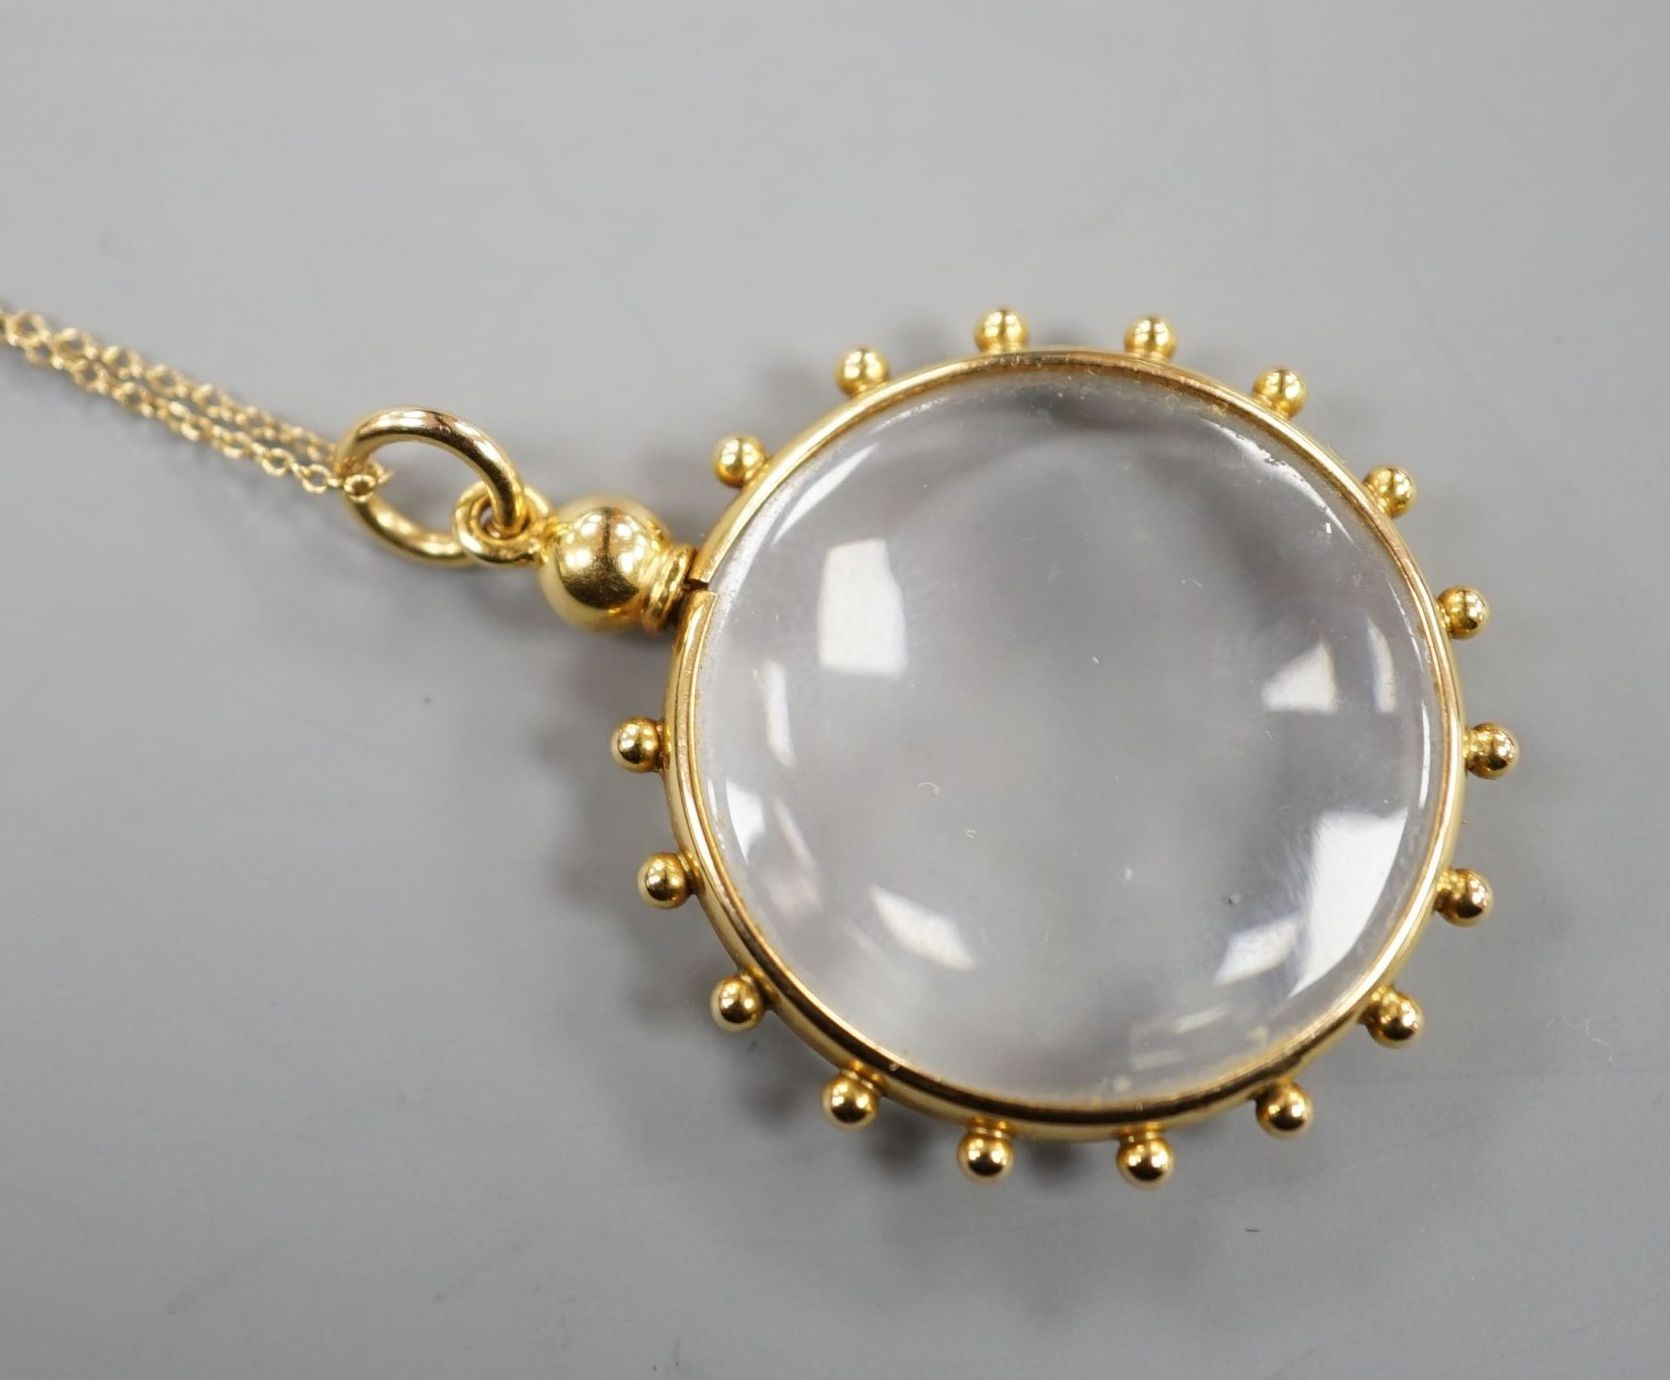 An early 20th century 15ct mounted eye glass pendant, 29mm, on a yellow metal fine link chain, gross 9.3 grams.